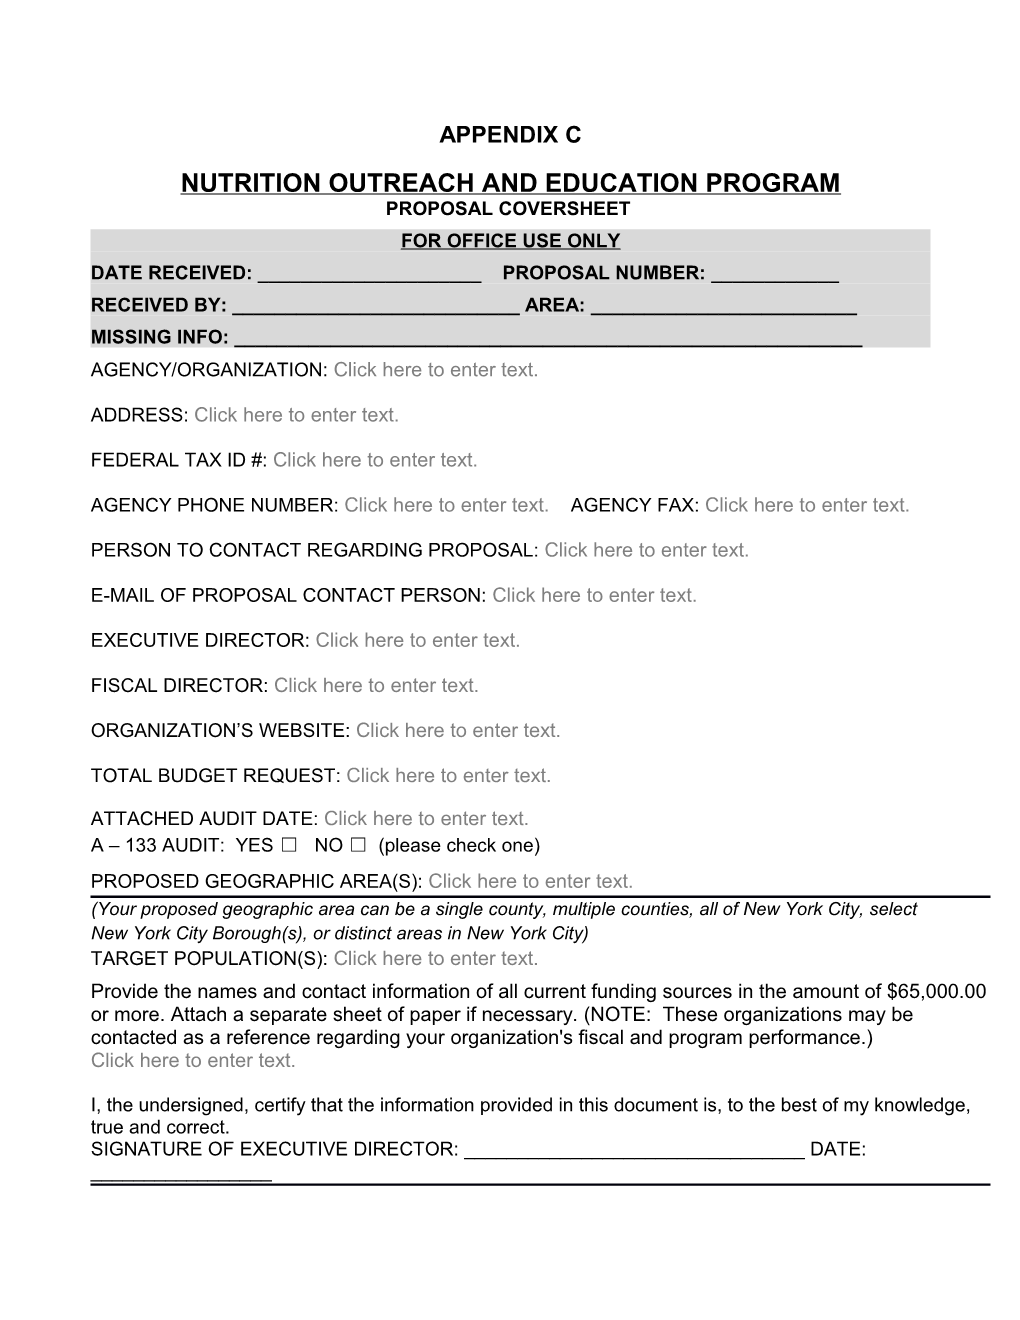 Nutrition Outreach and Education Program